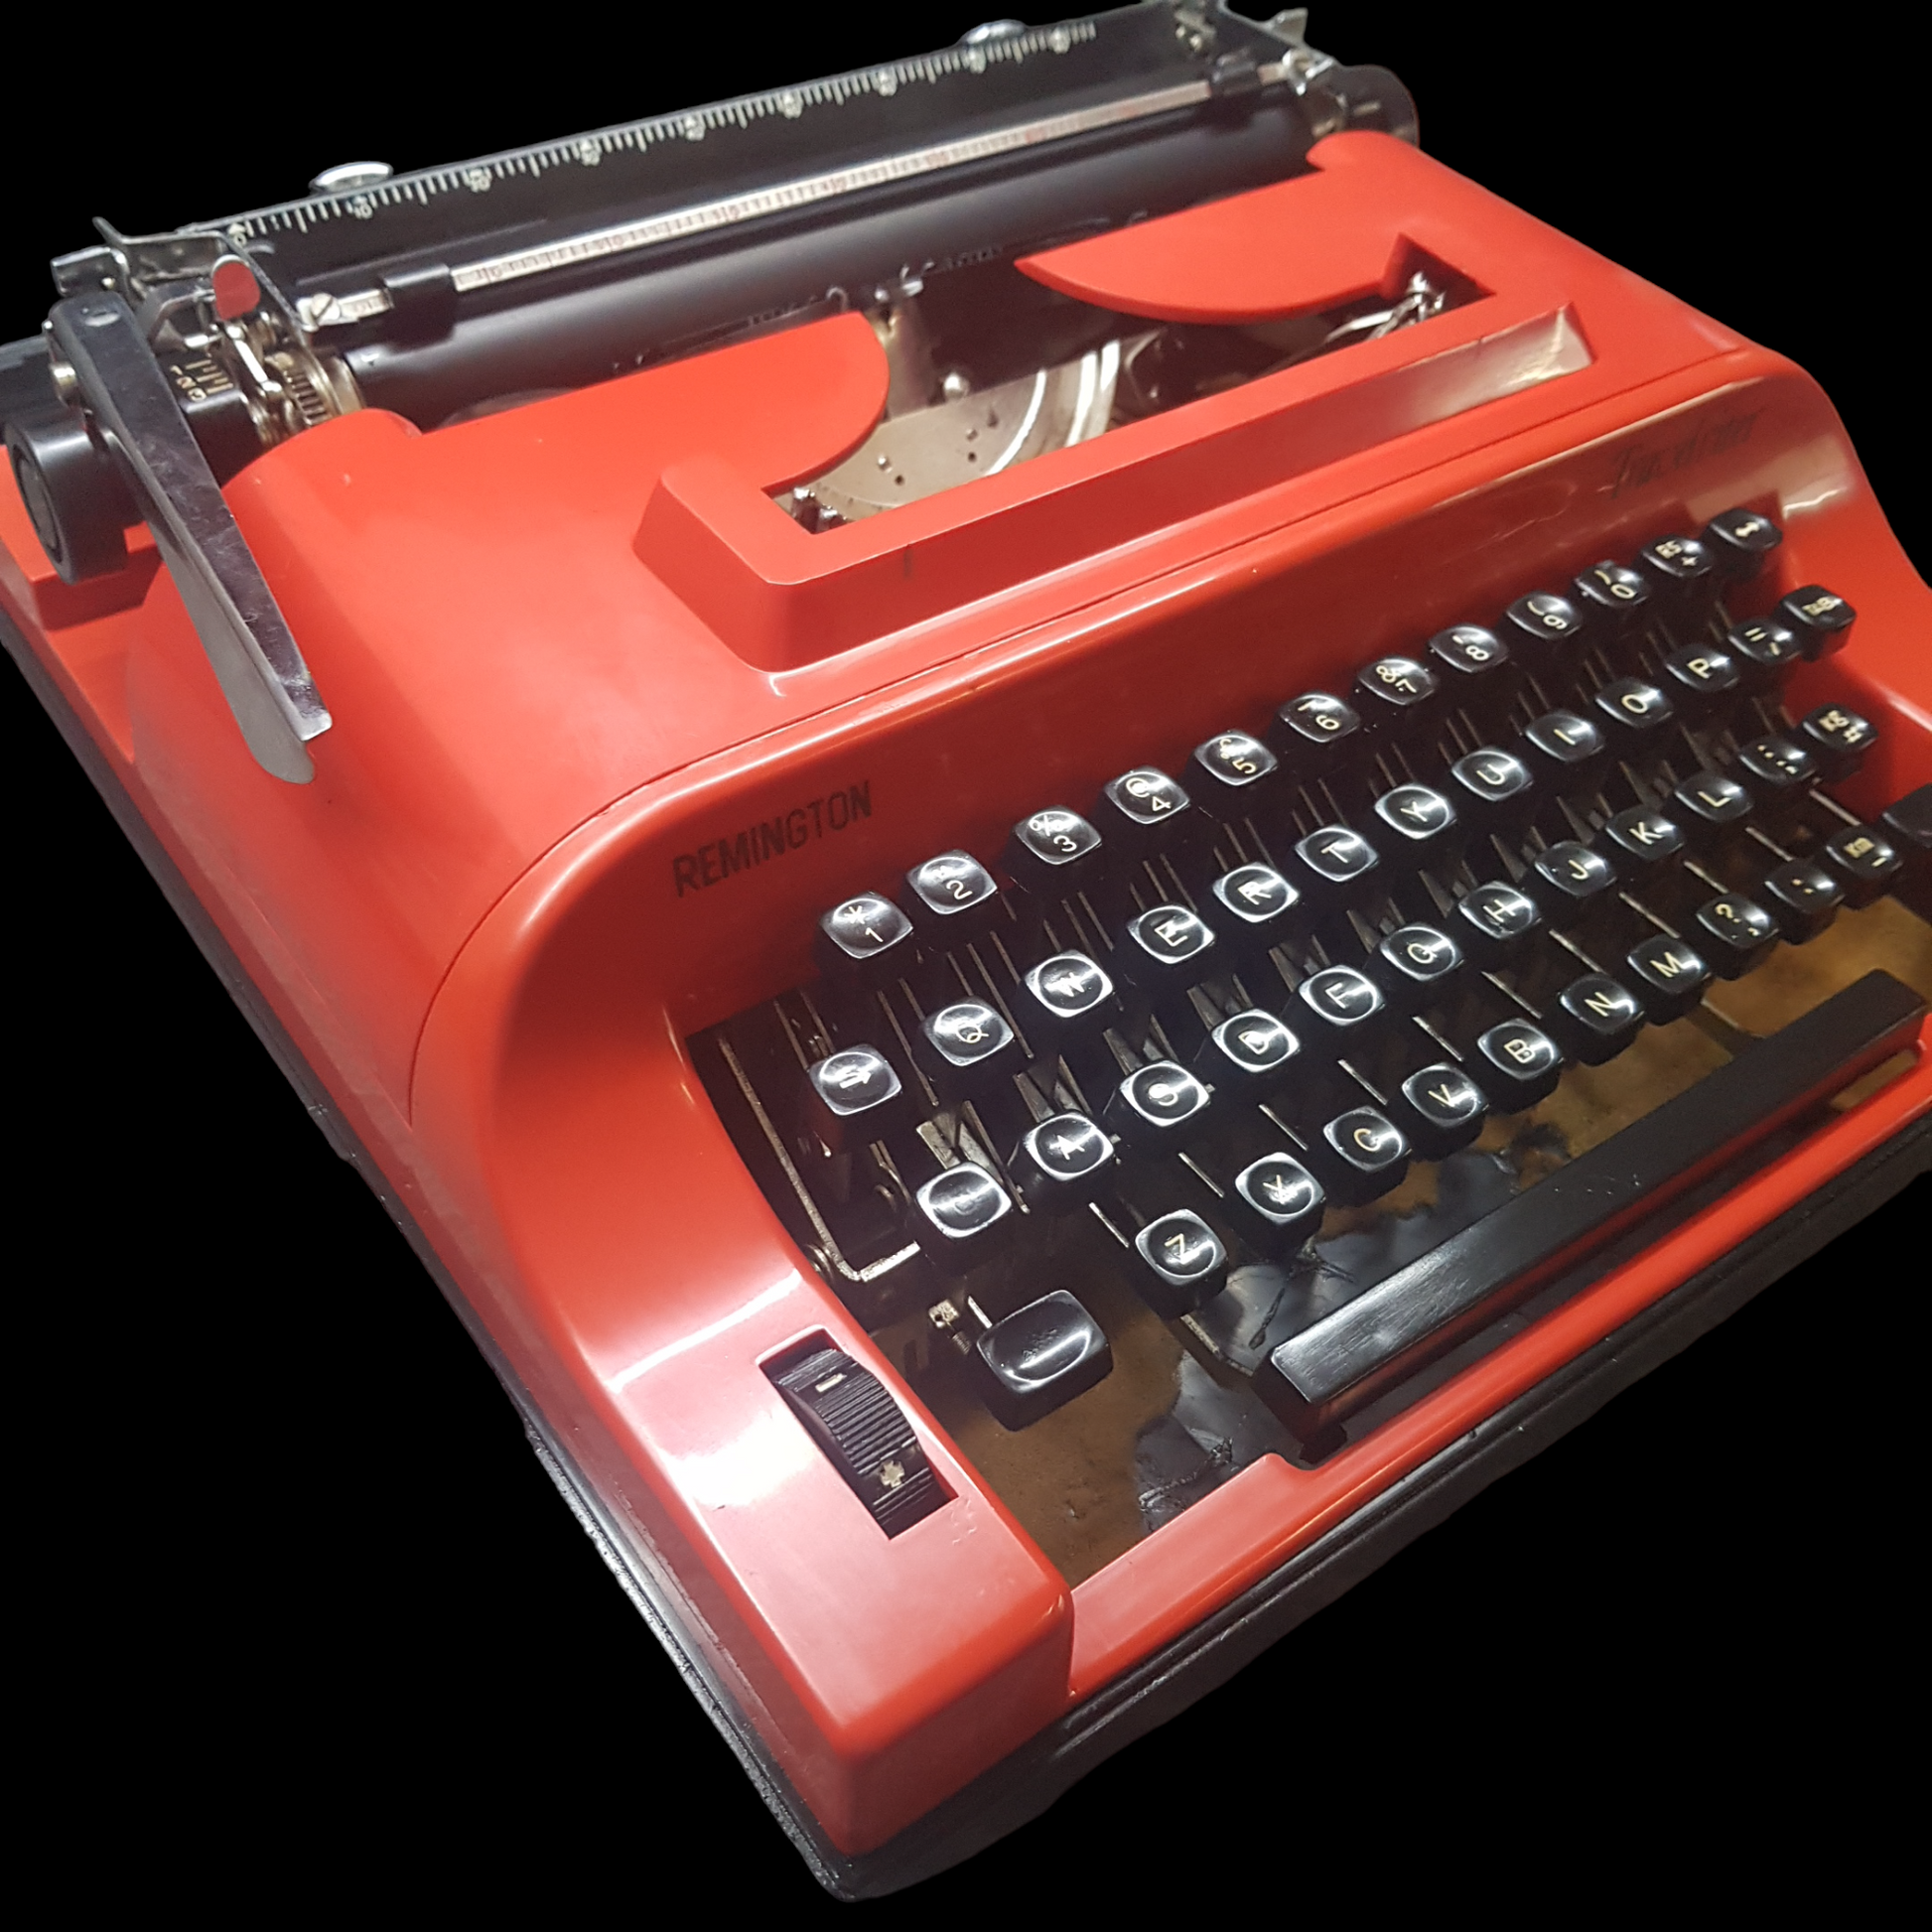 Image of Remington Travelriter Typewriter. Portable Typewriter. Made in Fibre. Available with Black Carry Cover from universaltypewritercompany.in